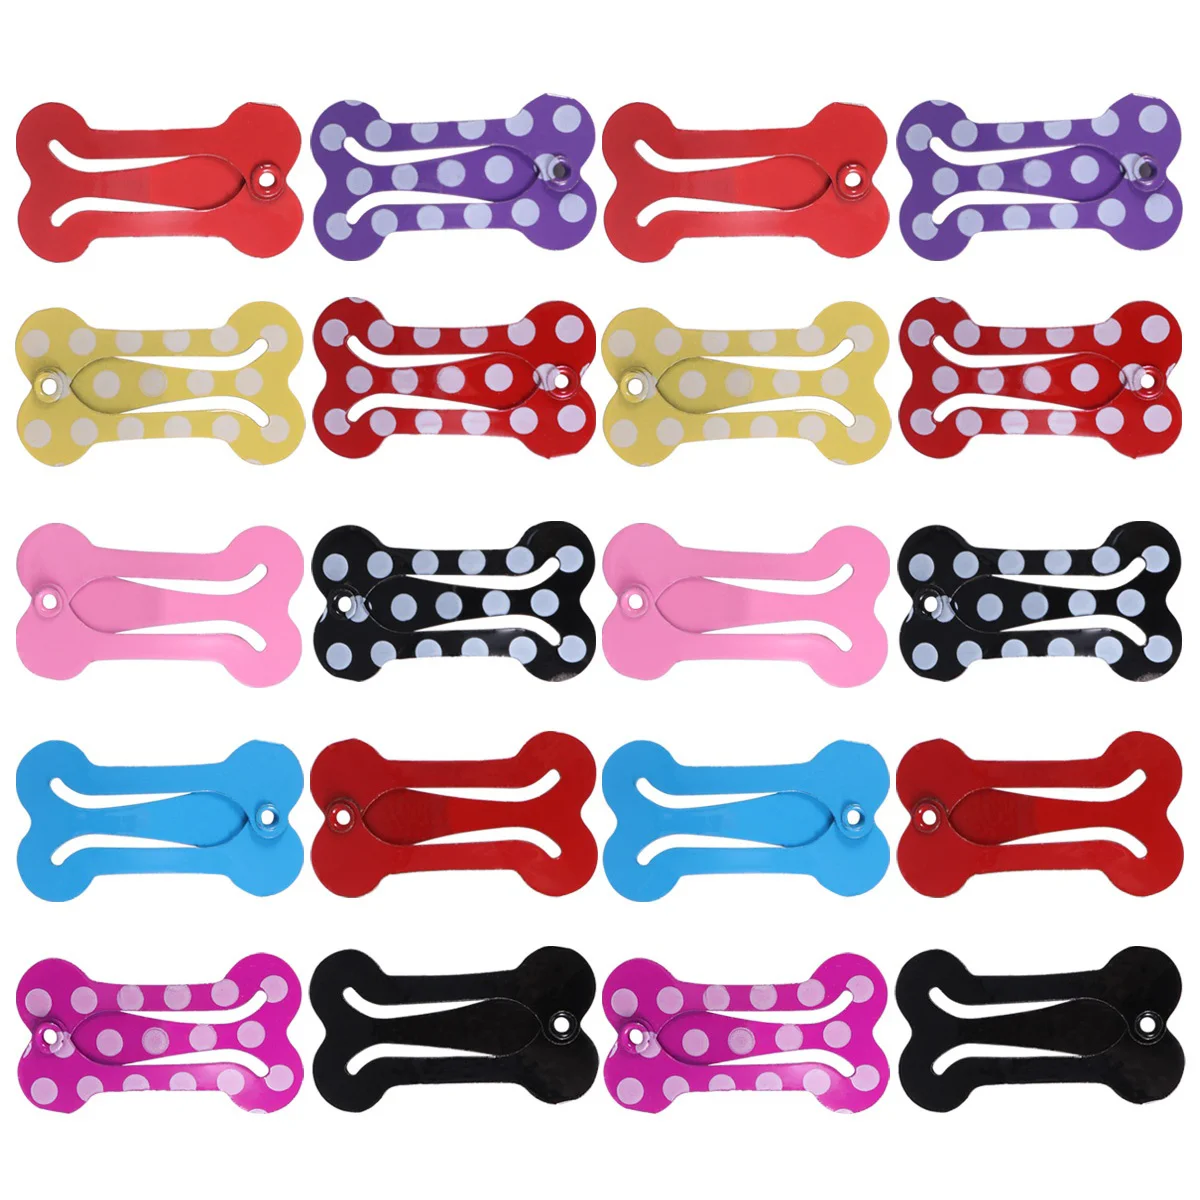 

20pcs Hair Clip- Shaped Snap Puppy Cat Hair Bows Grooming Topknot Bows Side Band Barrette for Cat Puppy Party Birthday Hair